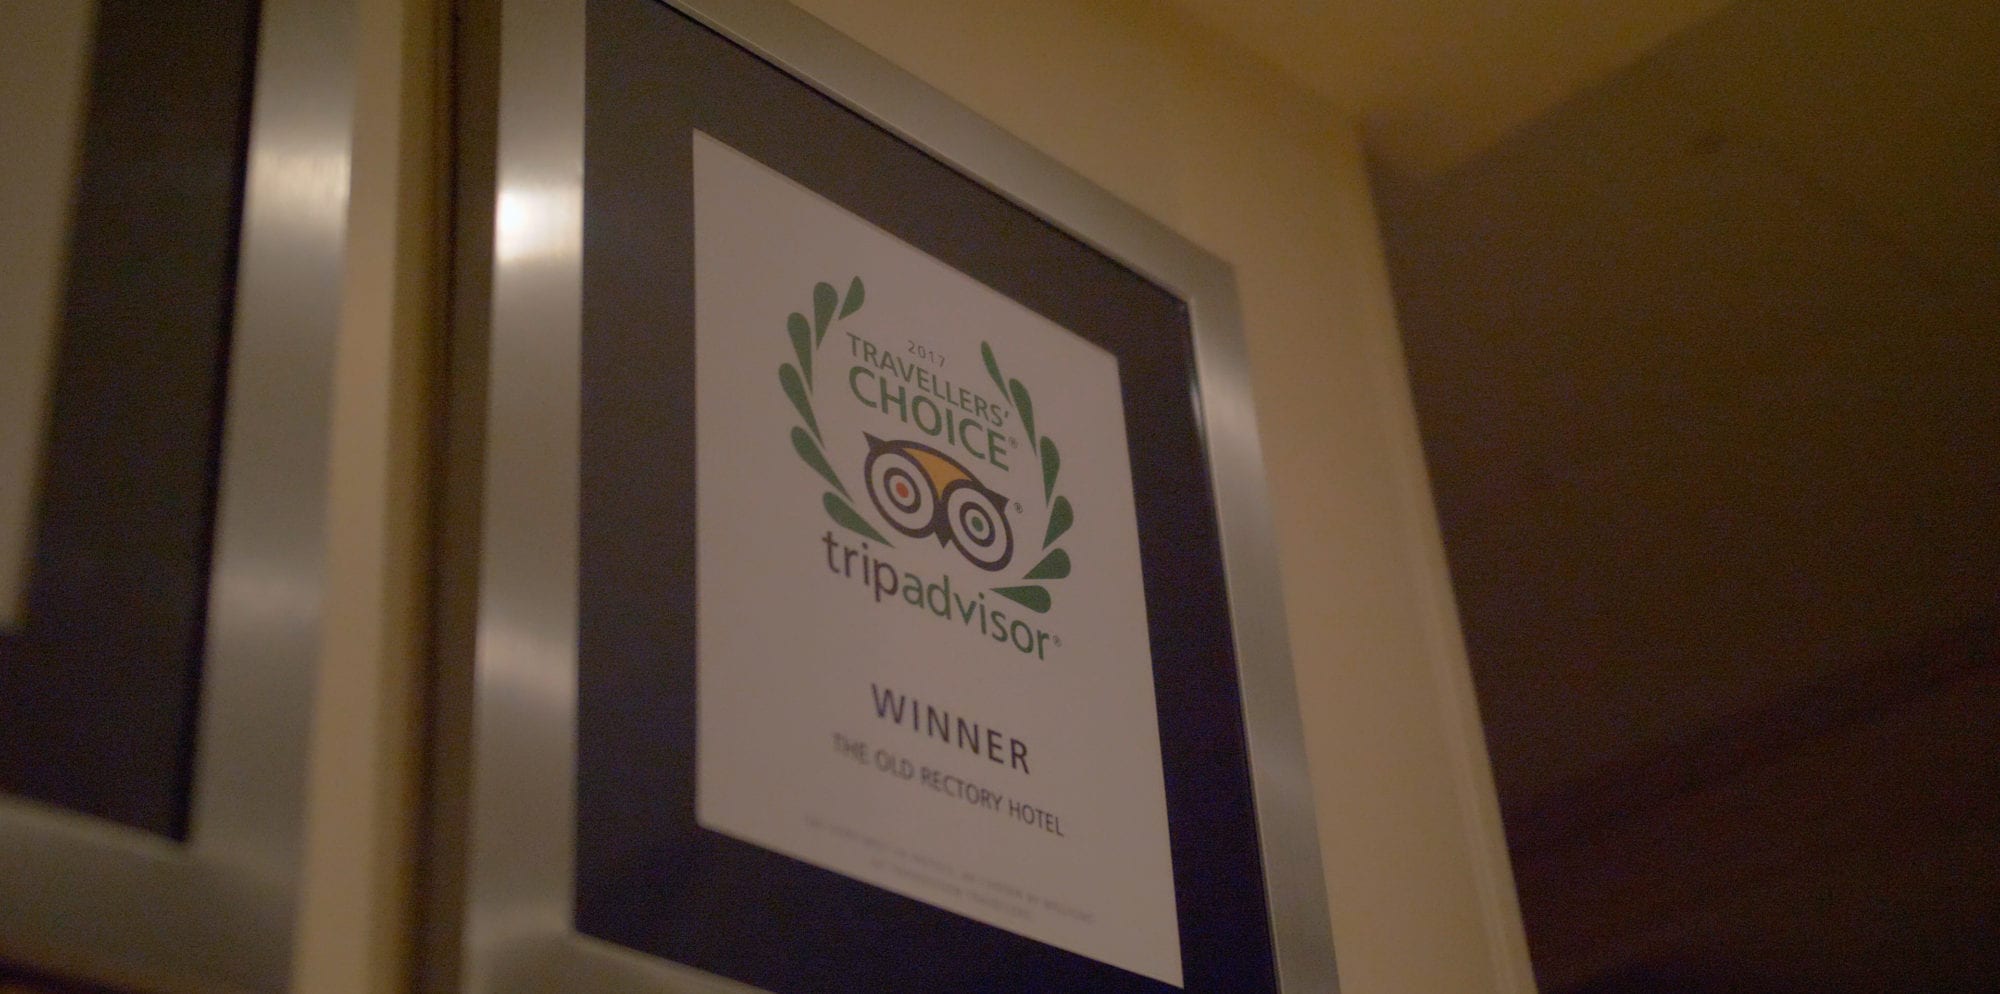 a picture of travellers choice 2017 trip advisor award